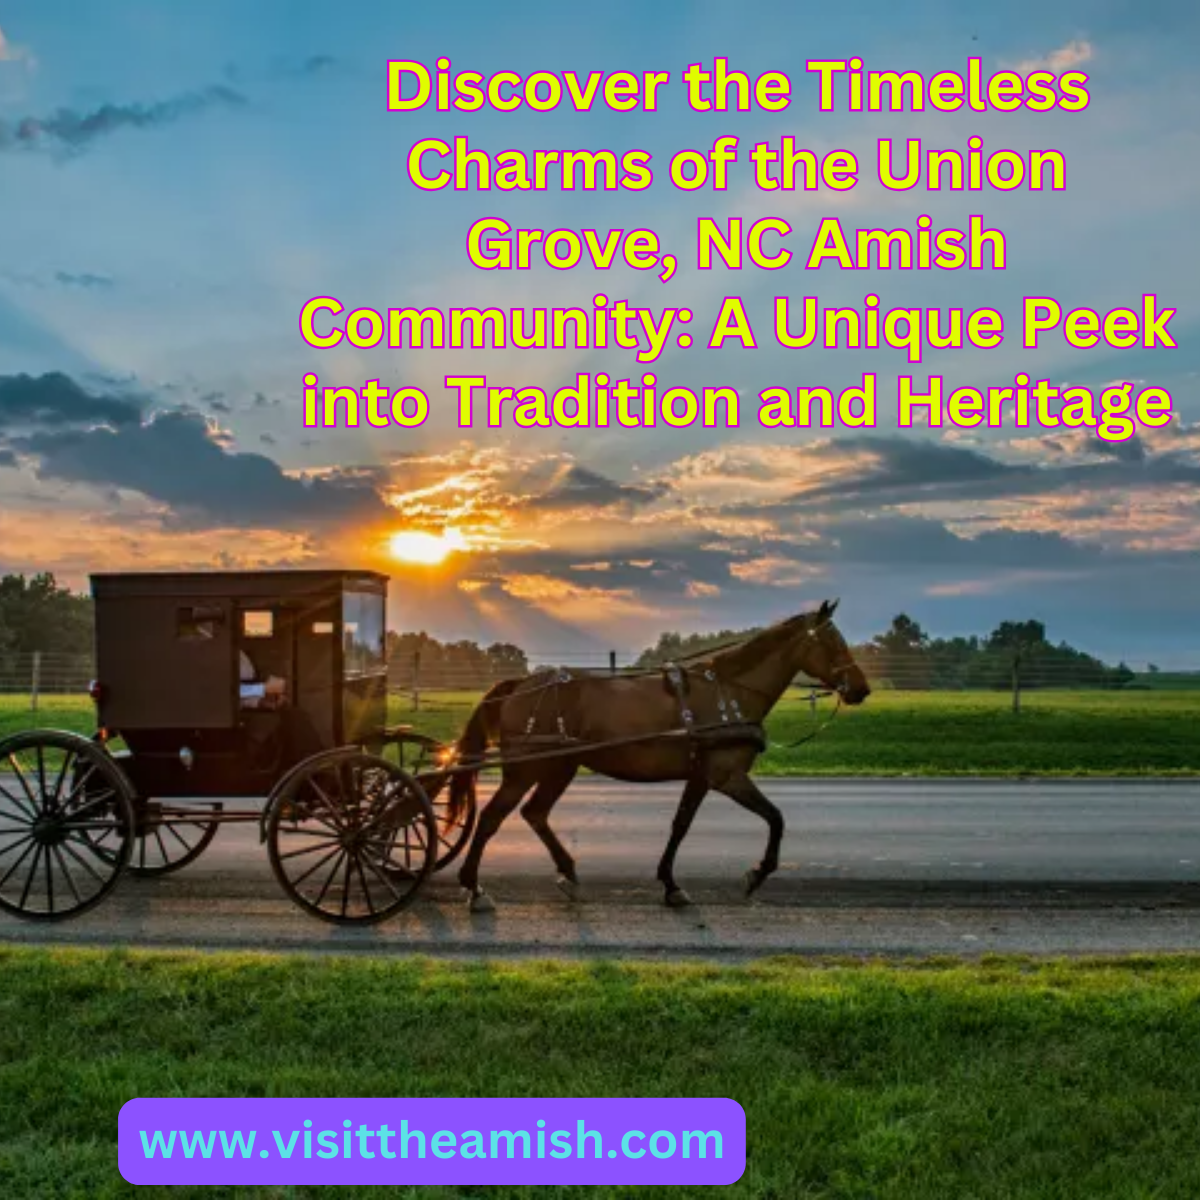 Discover the Timeless Charms of the Union Grove, NC Amish Community A Unique Peek into Tradition and Heritage